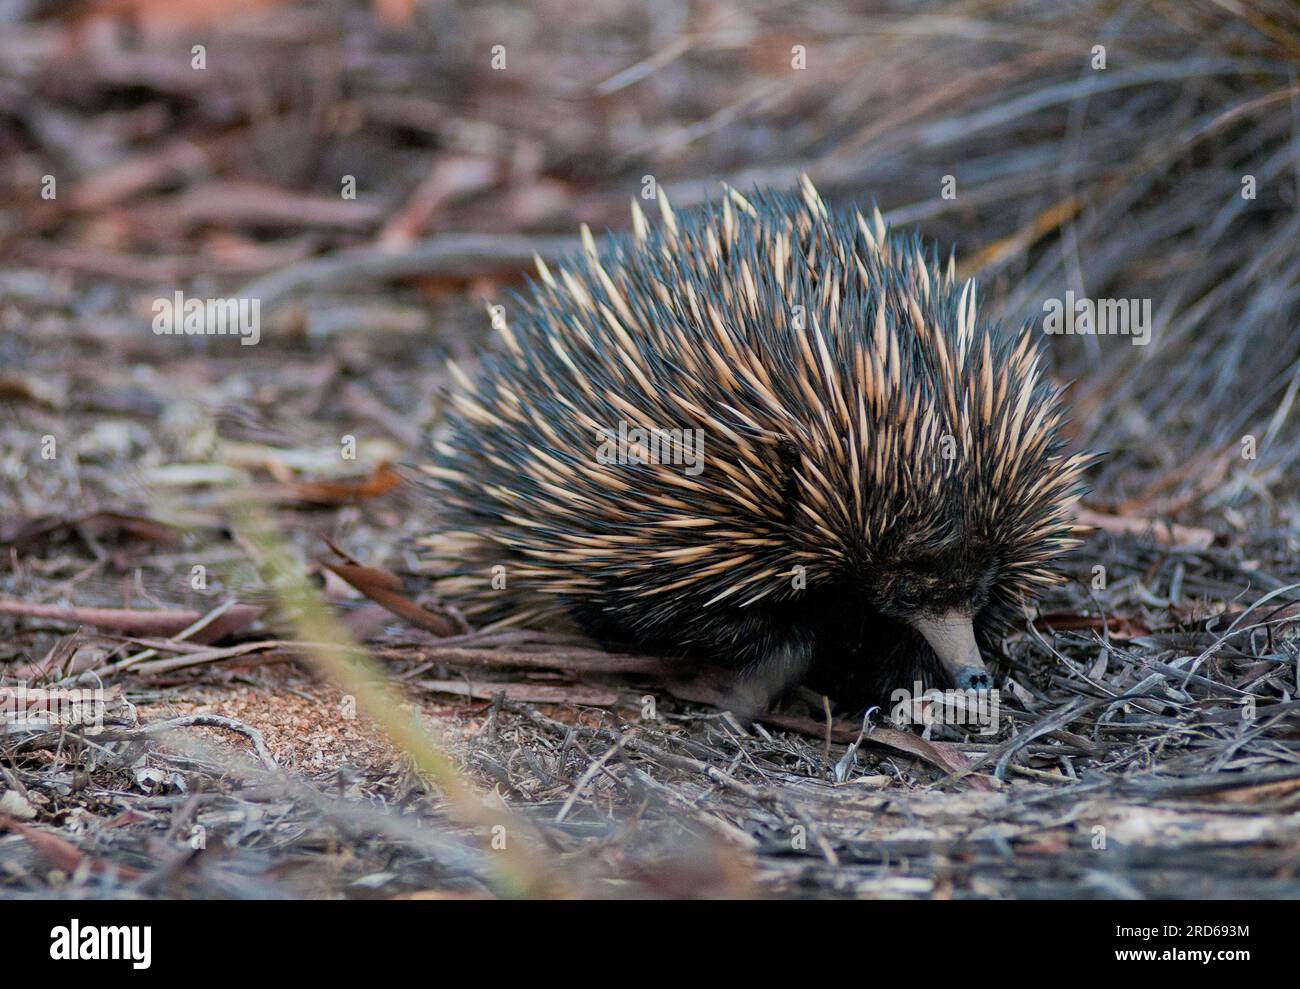 Spiny anteater, tachyglossus aculeatus, an echidna, Australia Occidentale Foto Stock